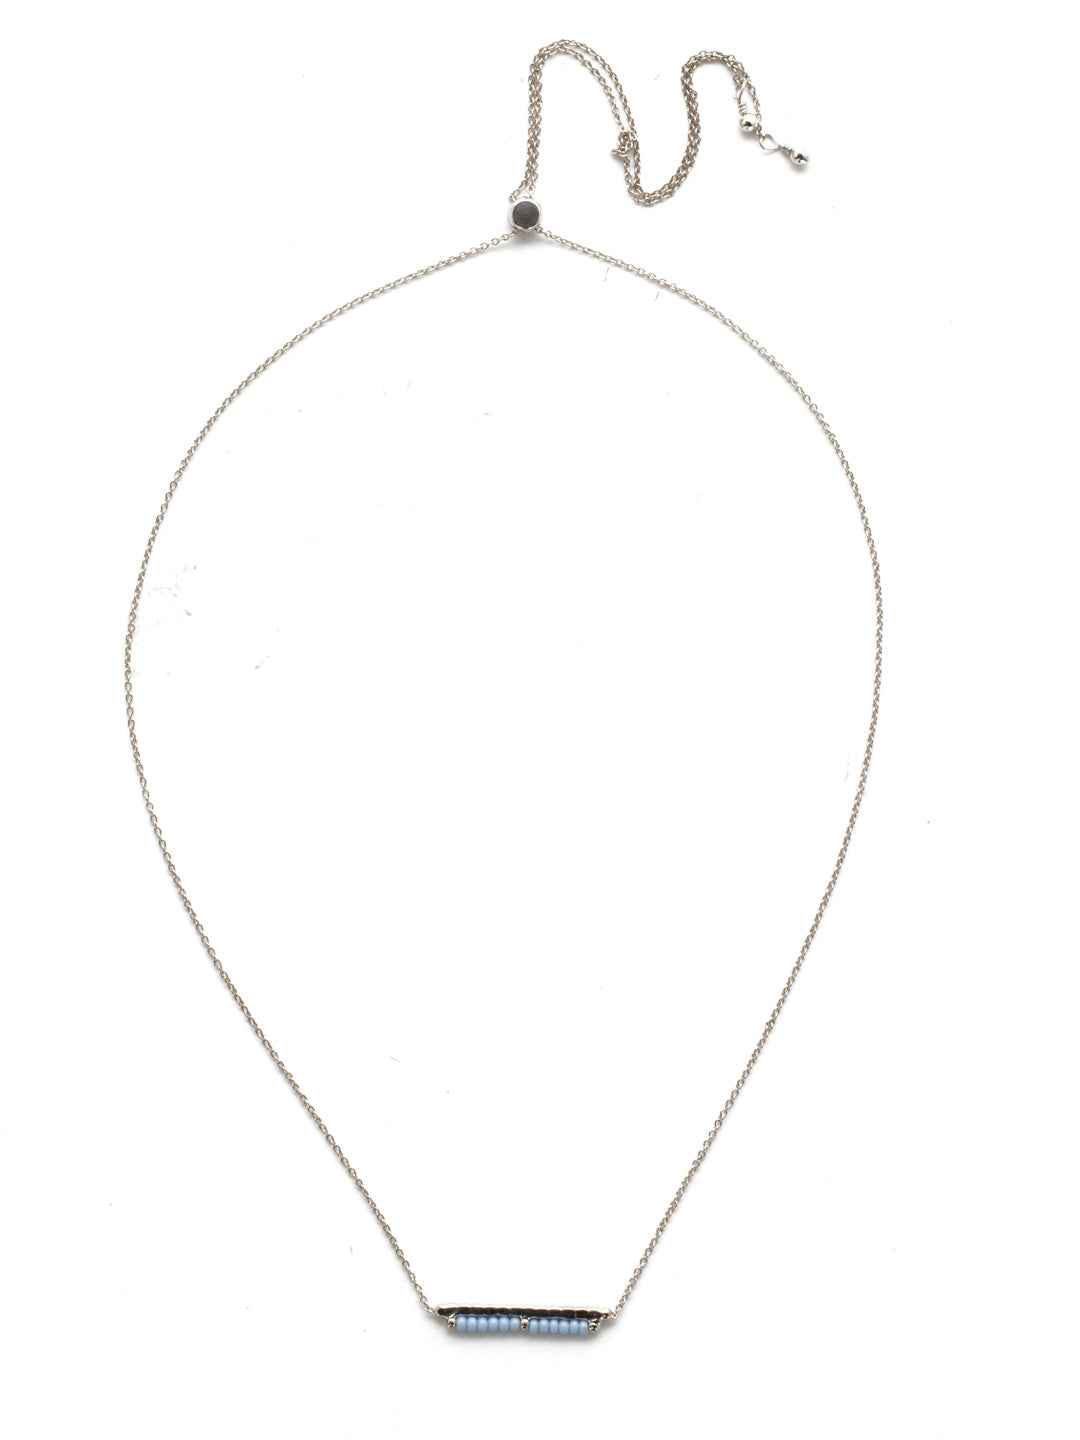 Bliss Pendant Necklace - NEK32RHSSU - <p>A simple statement piece, this pendant necklace features a row of crystal gems can be adjusted to your length of choice. From Sorrelli's Seersucker collection in our Palladium Silver-tone finish.</p>